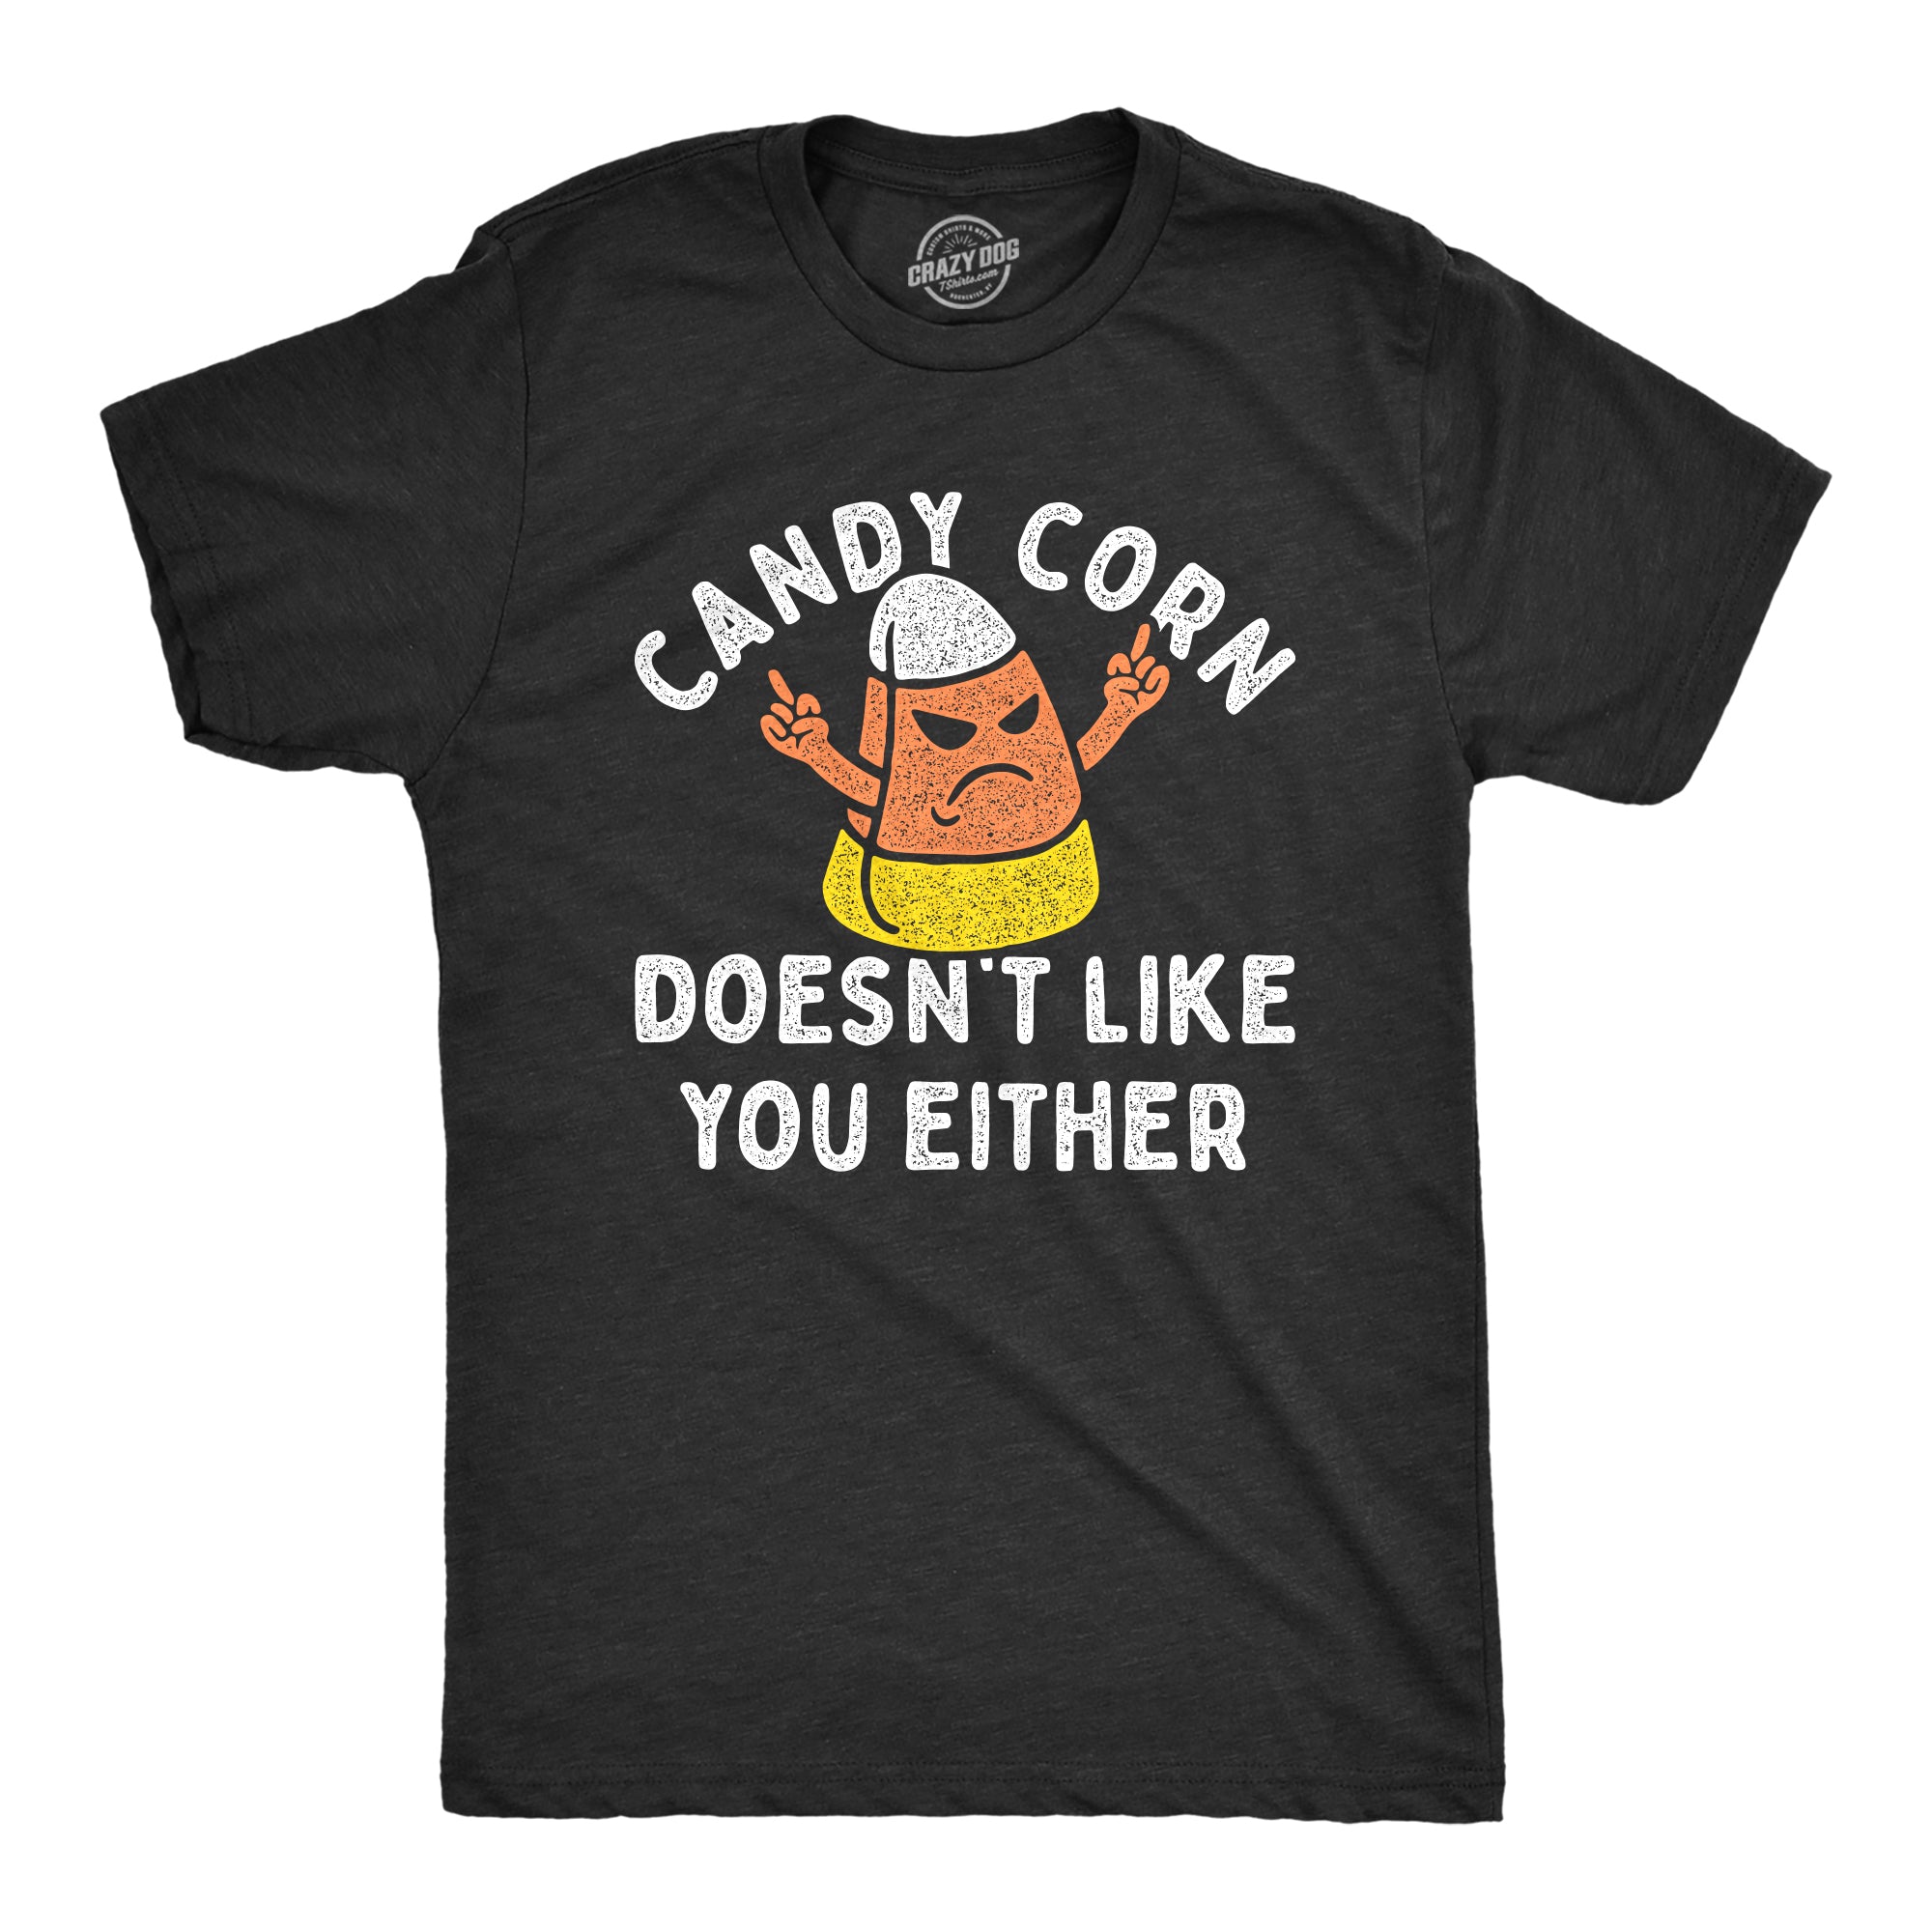 Funny Heather Black - CANDYCORN Candy Corn Doesnt Like You Either Mens T Shirt Nerdy Halloween Food Tee